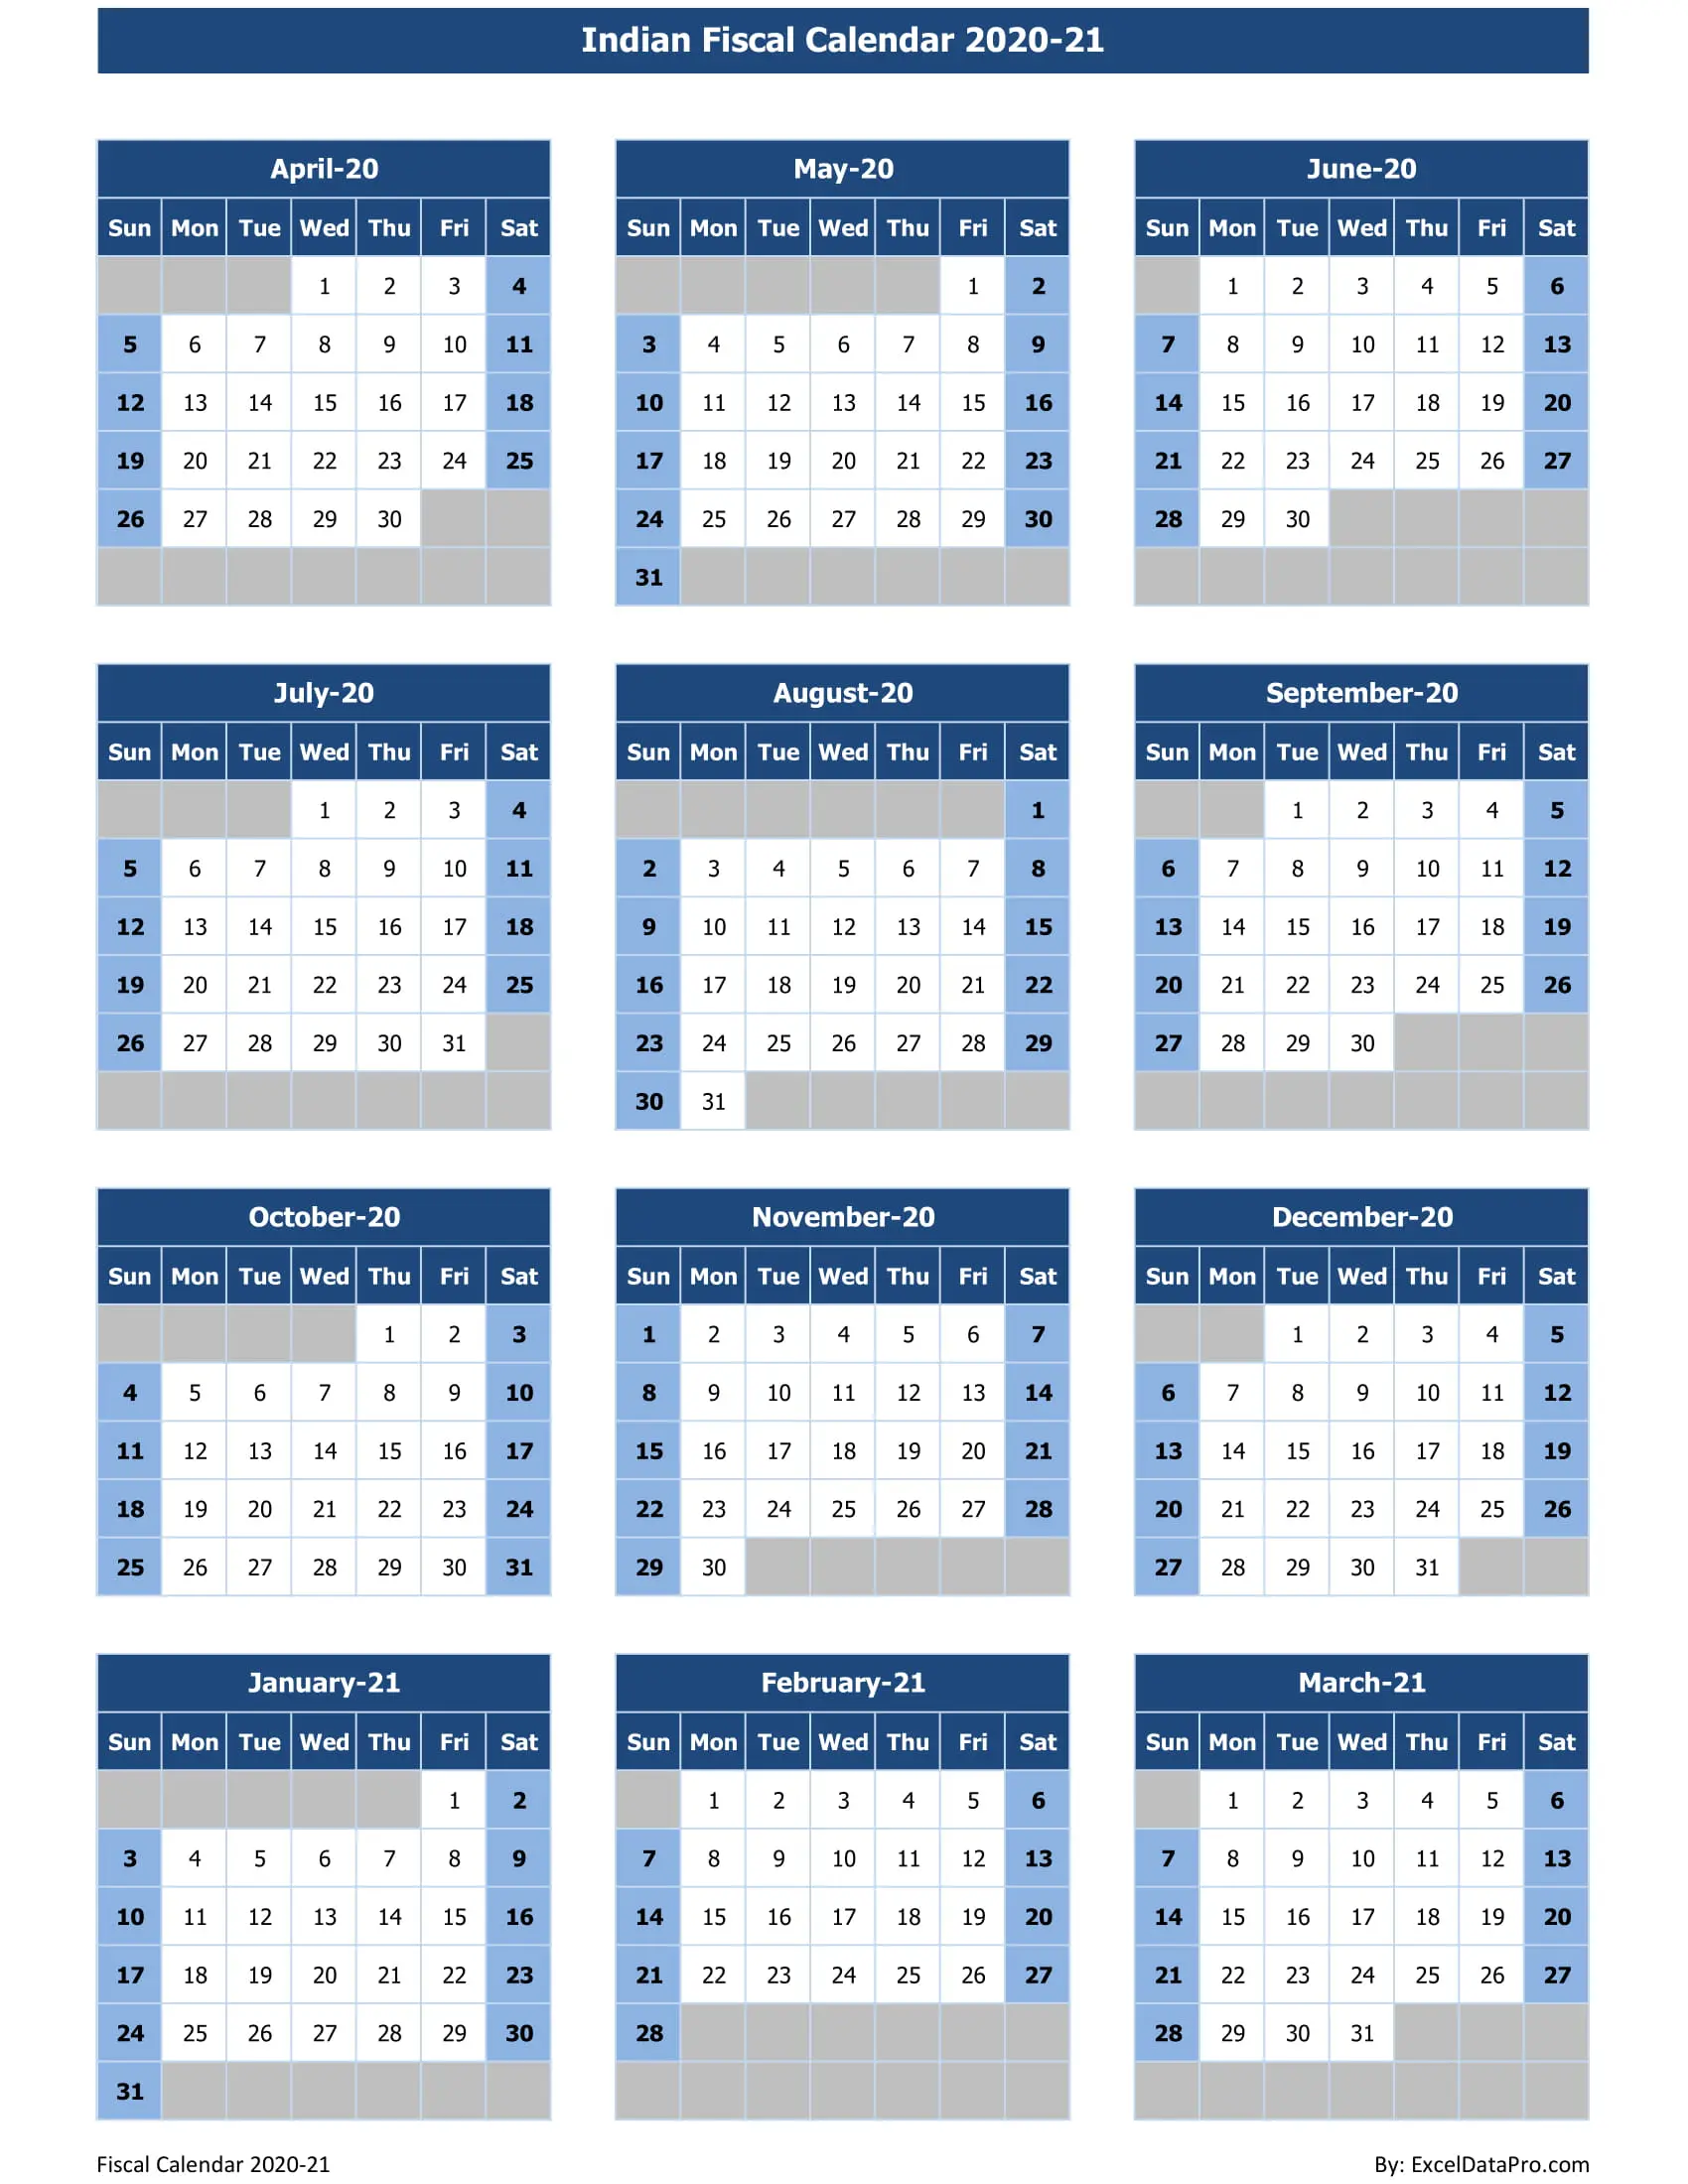 2020 Calendar Templates And Images